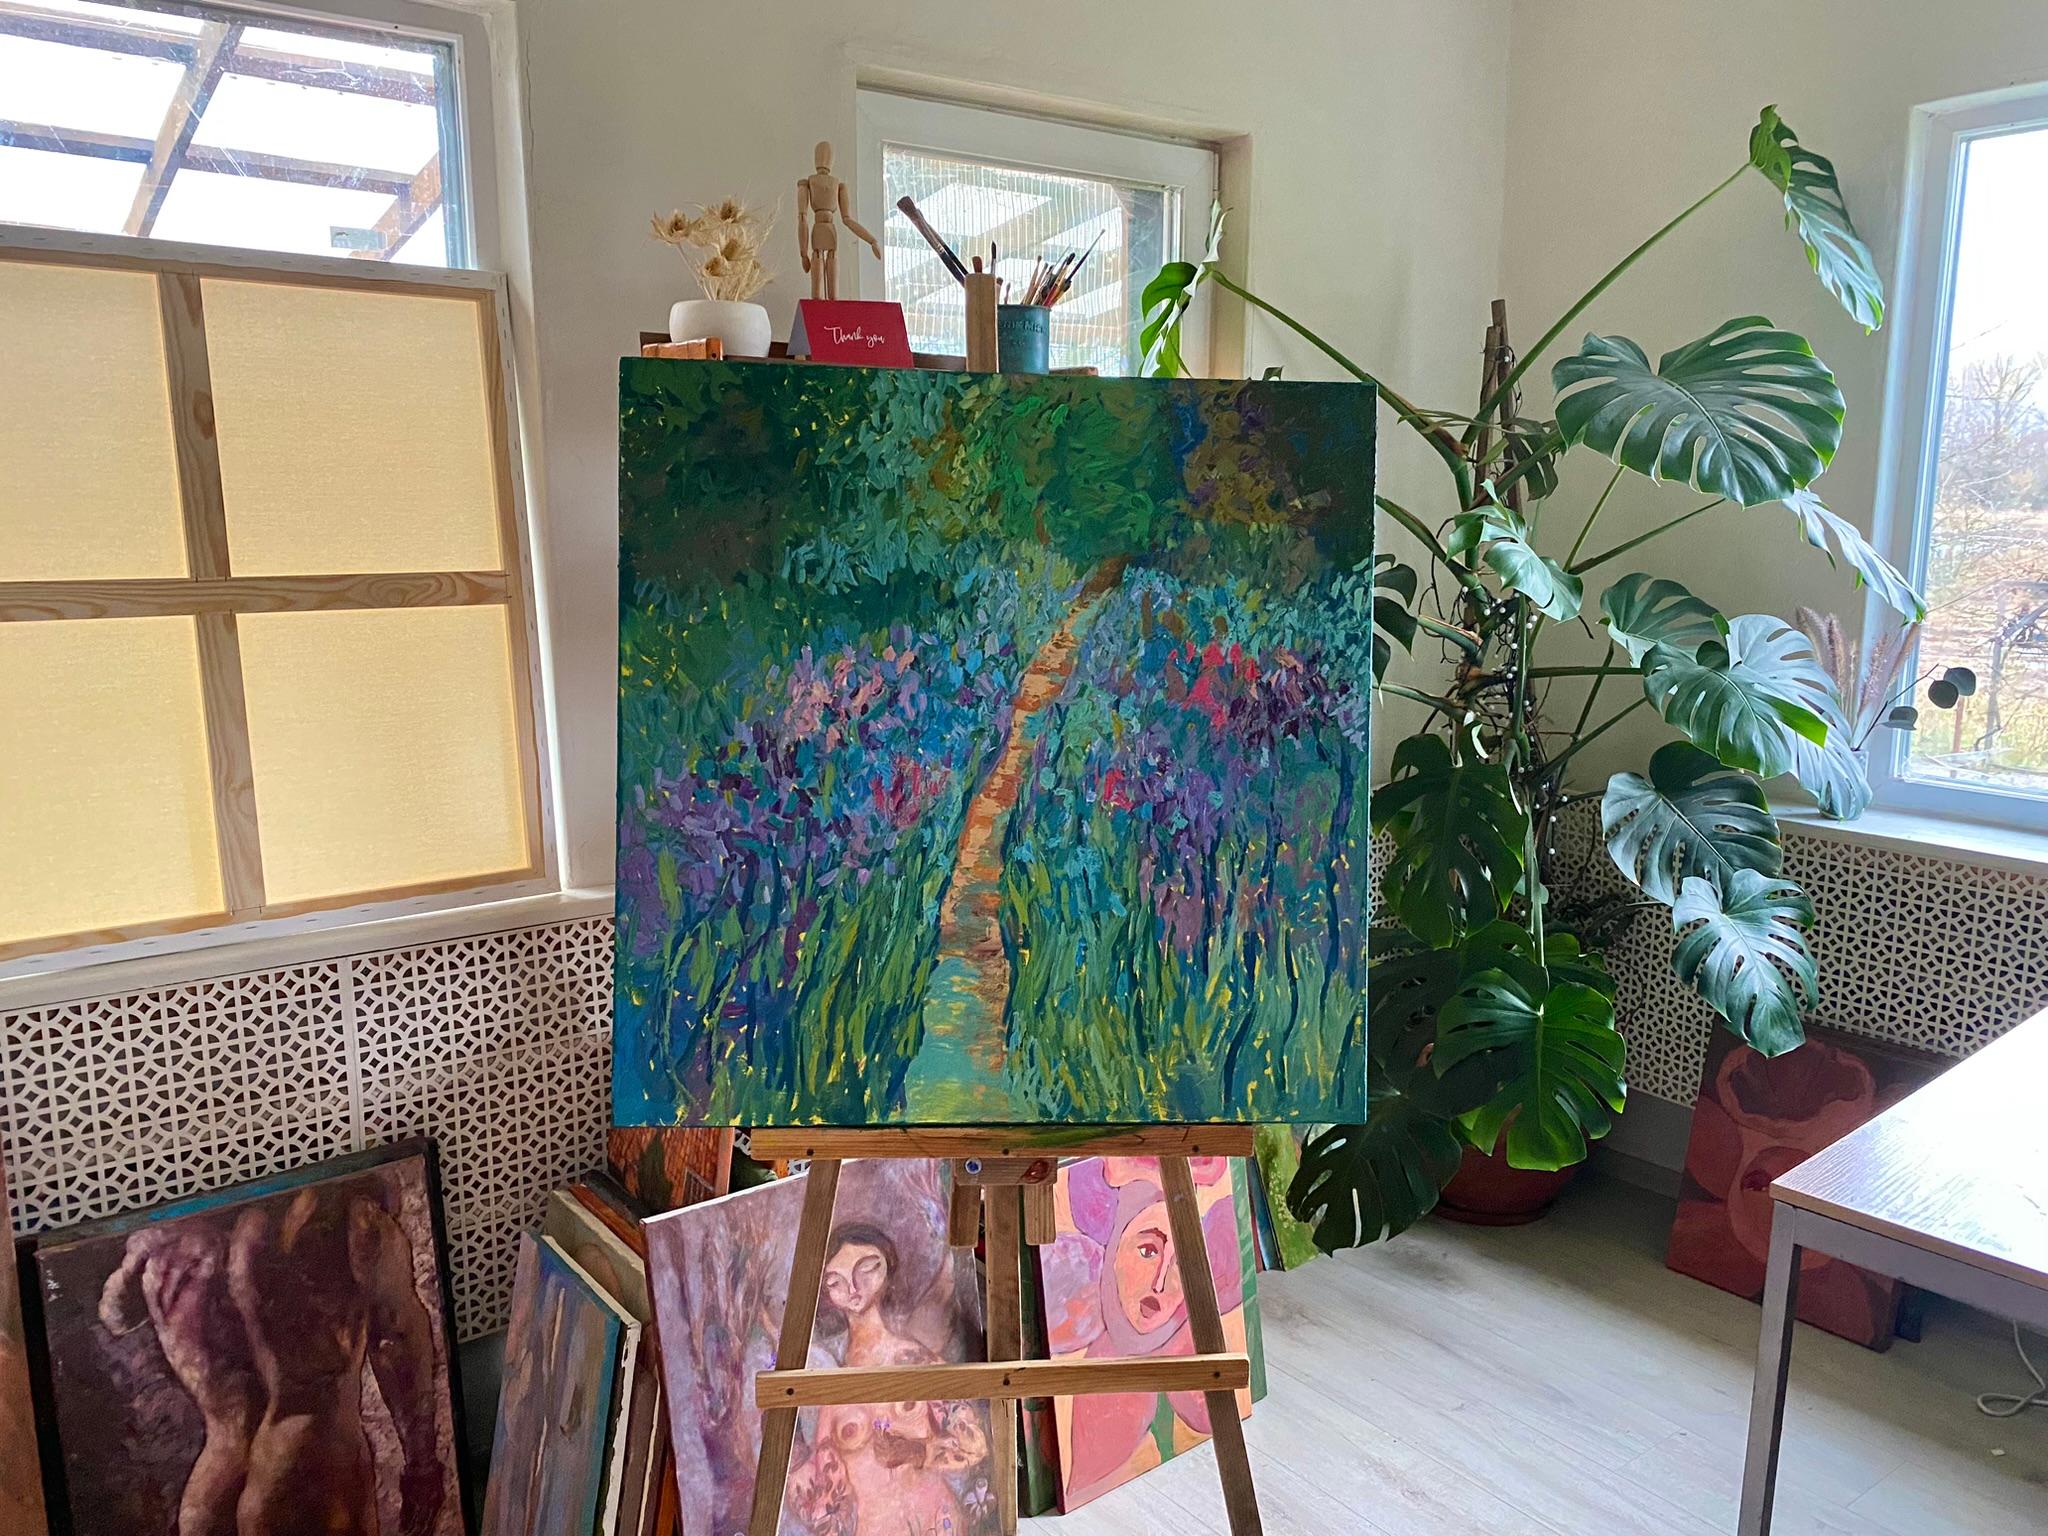 ABOUT THE ARTWORK
“Pleasure Garden” is a canvas brimming with the splendor of life and nature, where each flower and leaf pulsates with vitality under the artist’s confident brushstroke. Here, a traditional garden landscape transforms into a